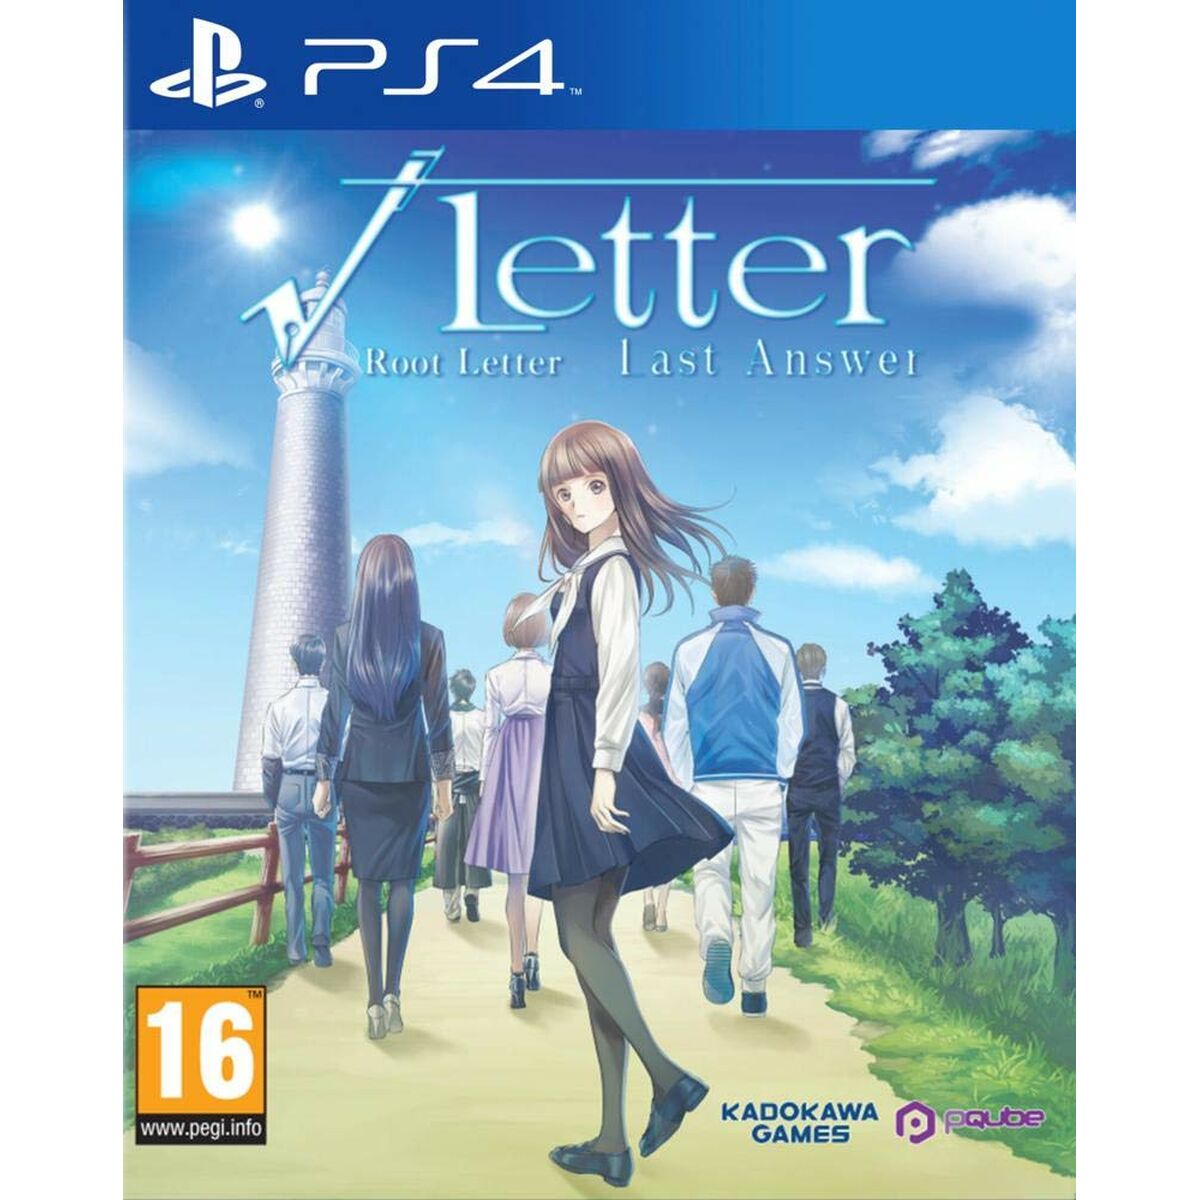 Joc video PlayStation 4 Meridiem Games Root Letter: Last Answer - Day One Edition